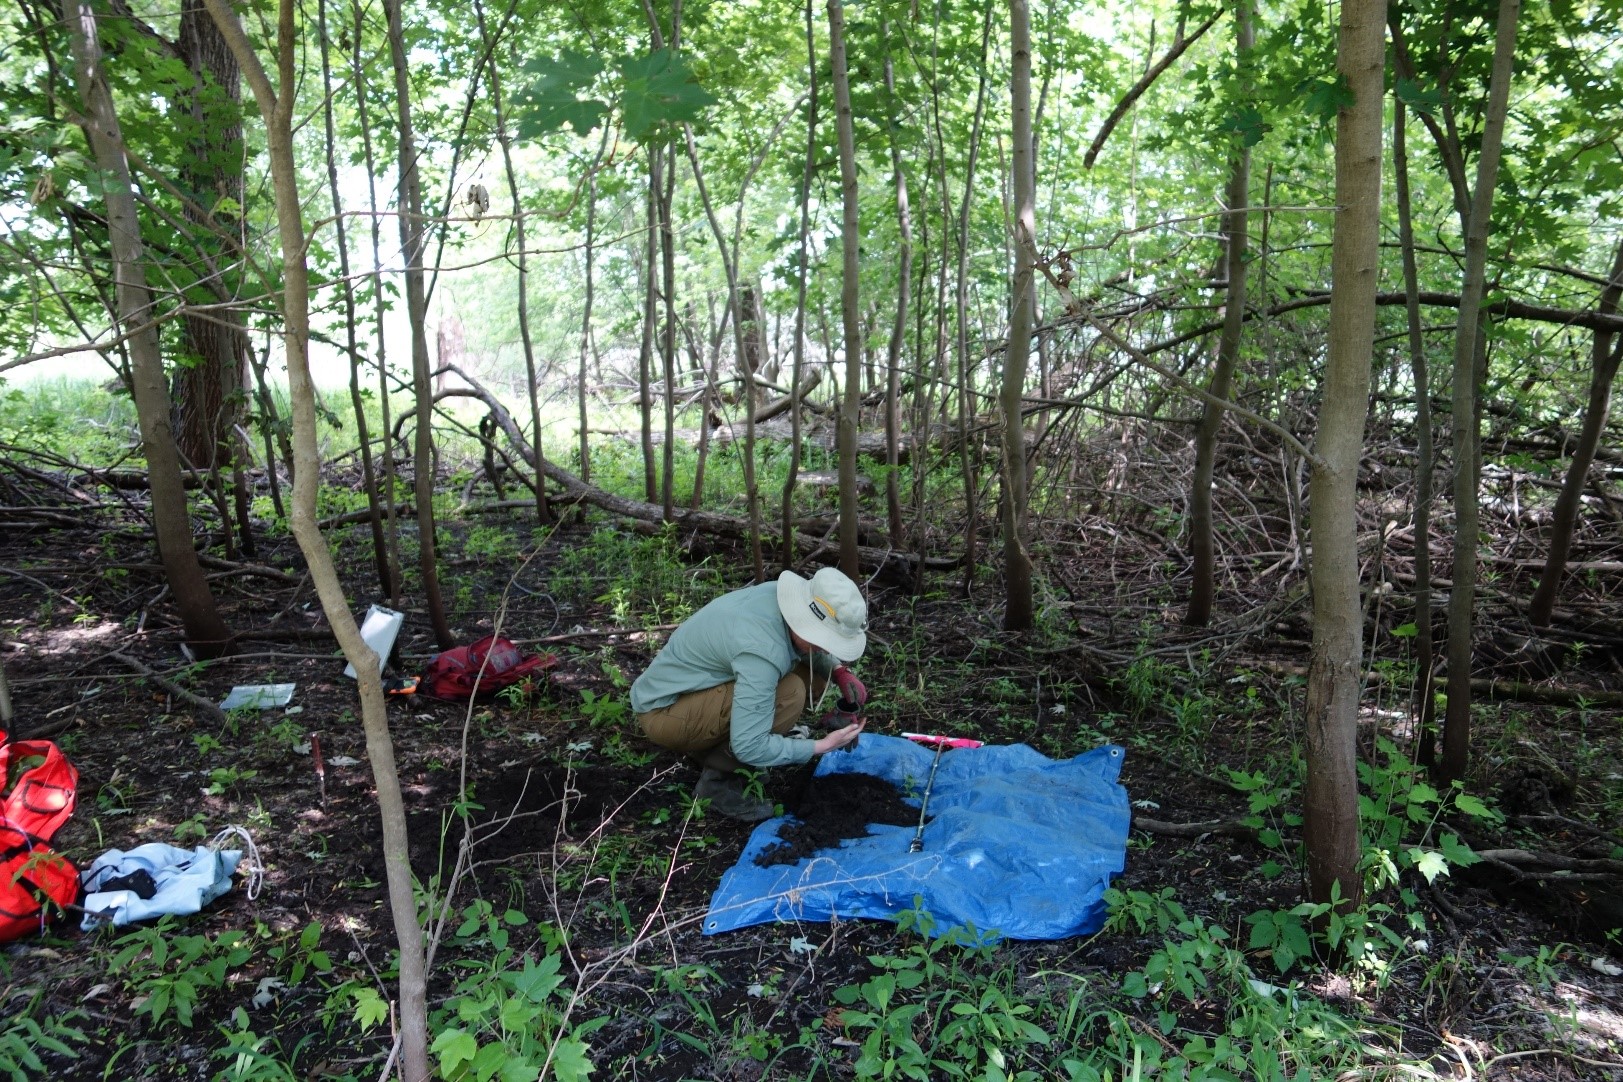 Conditions on the Flynnville site at sample plot 259 of young forest with excellent silver maple regeneration